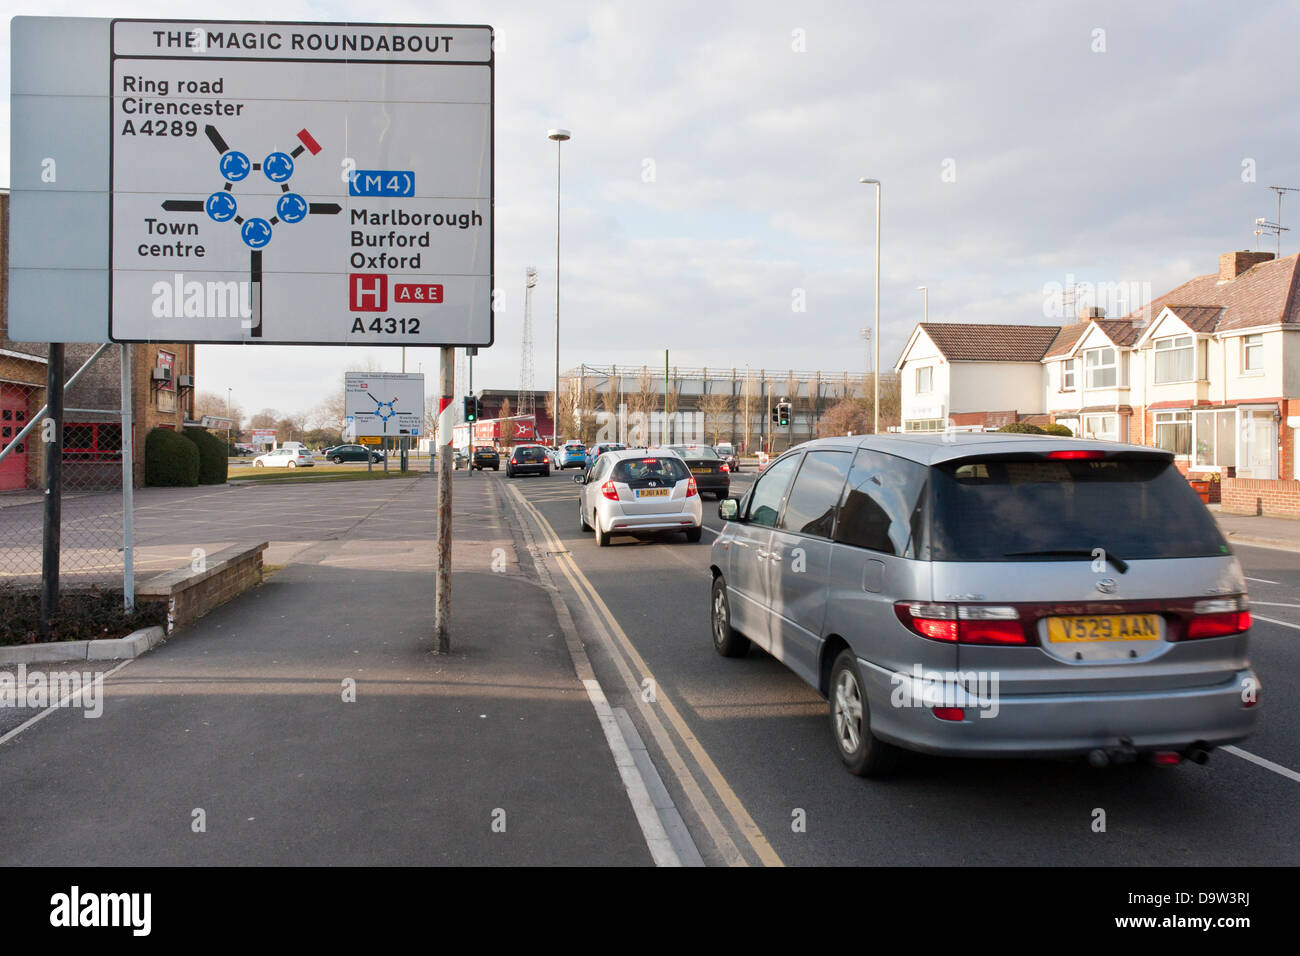 Access road to the five mini-roundabouts at the notorious Magic Roundabout in Swindon. Stock Photo